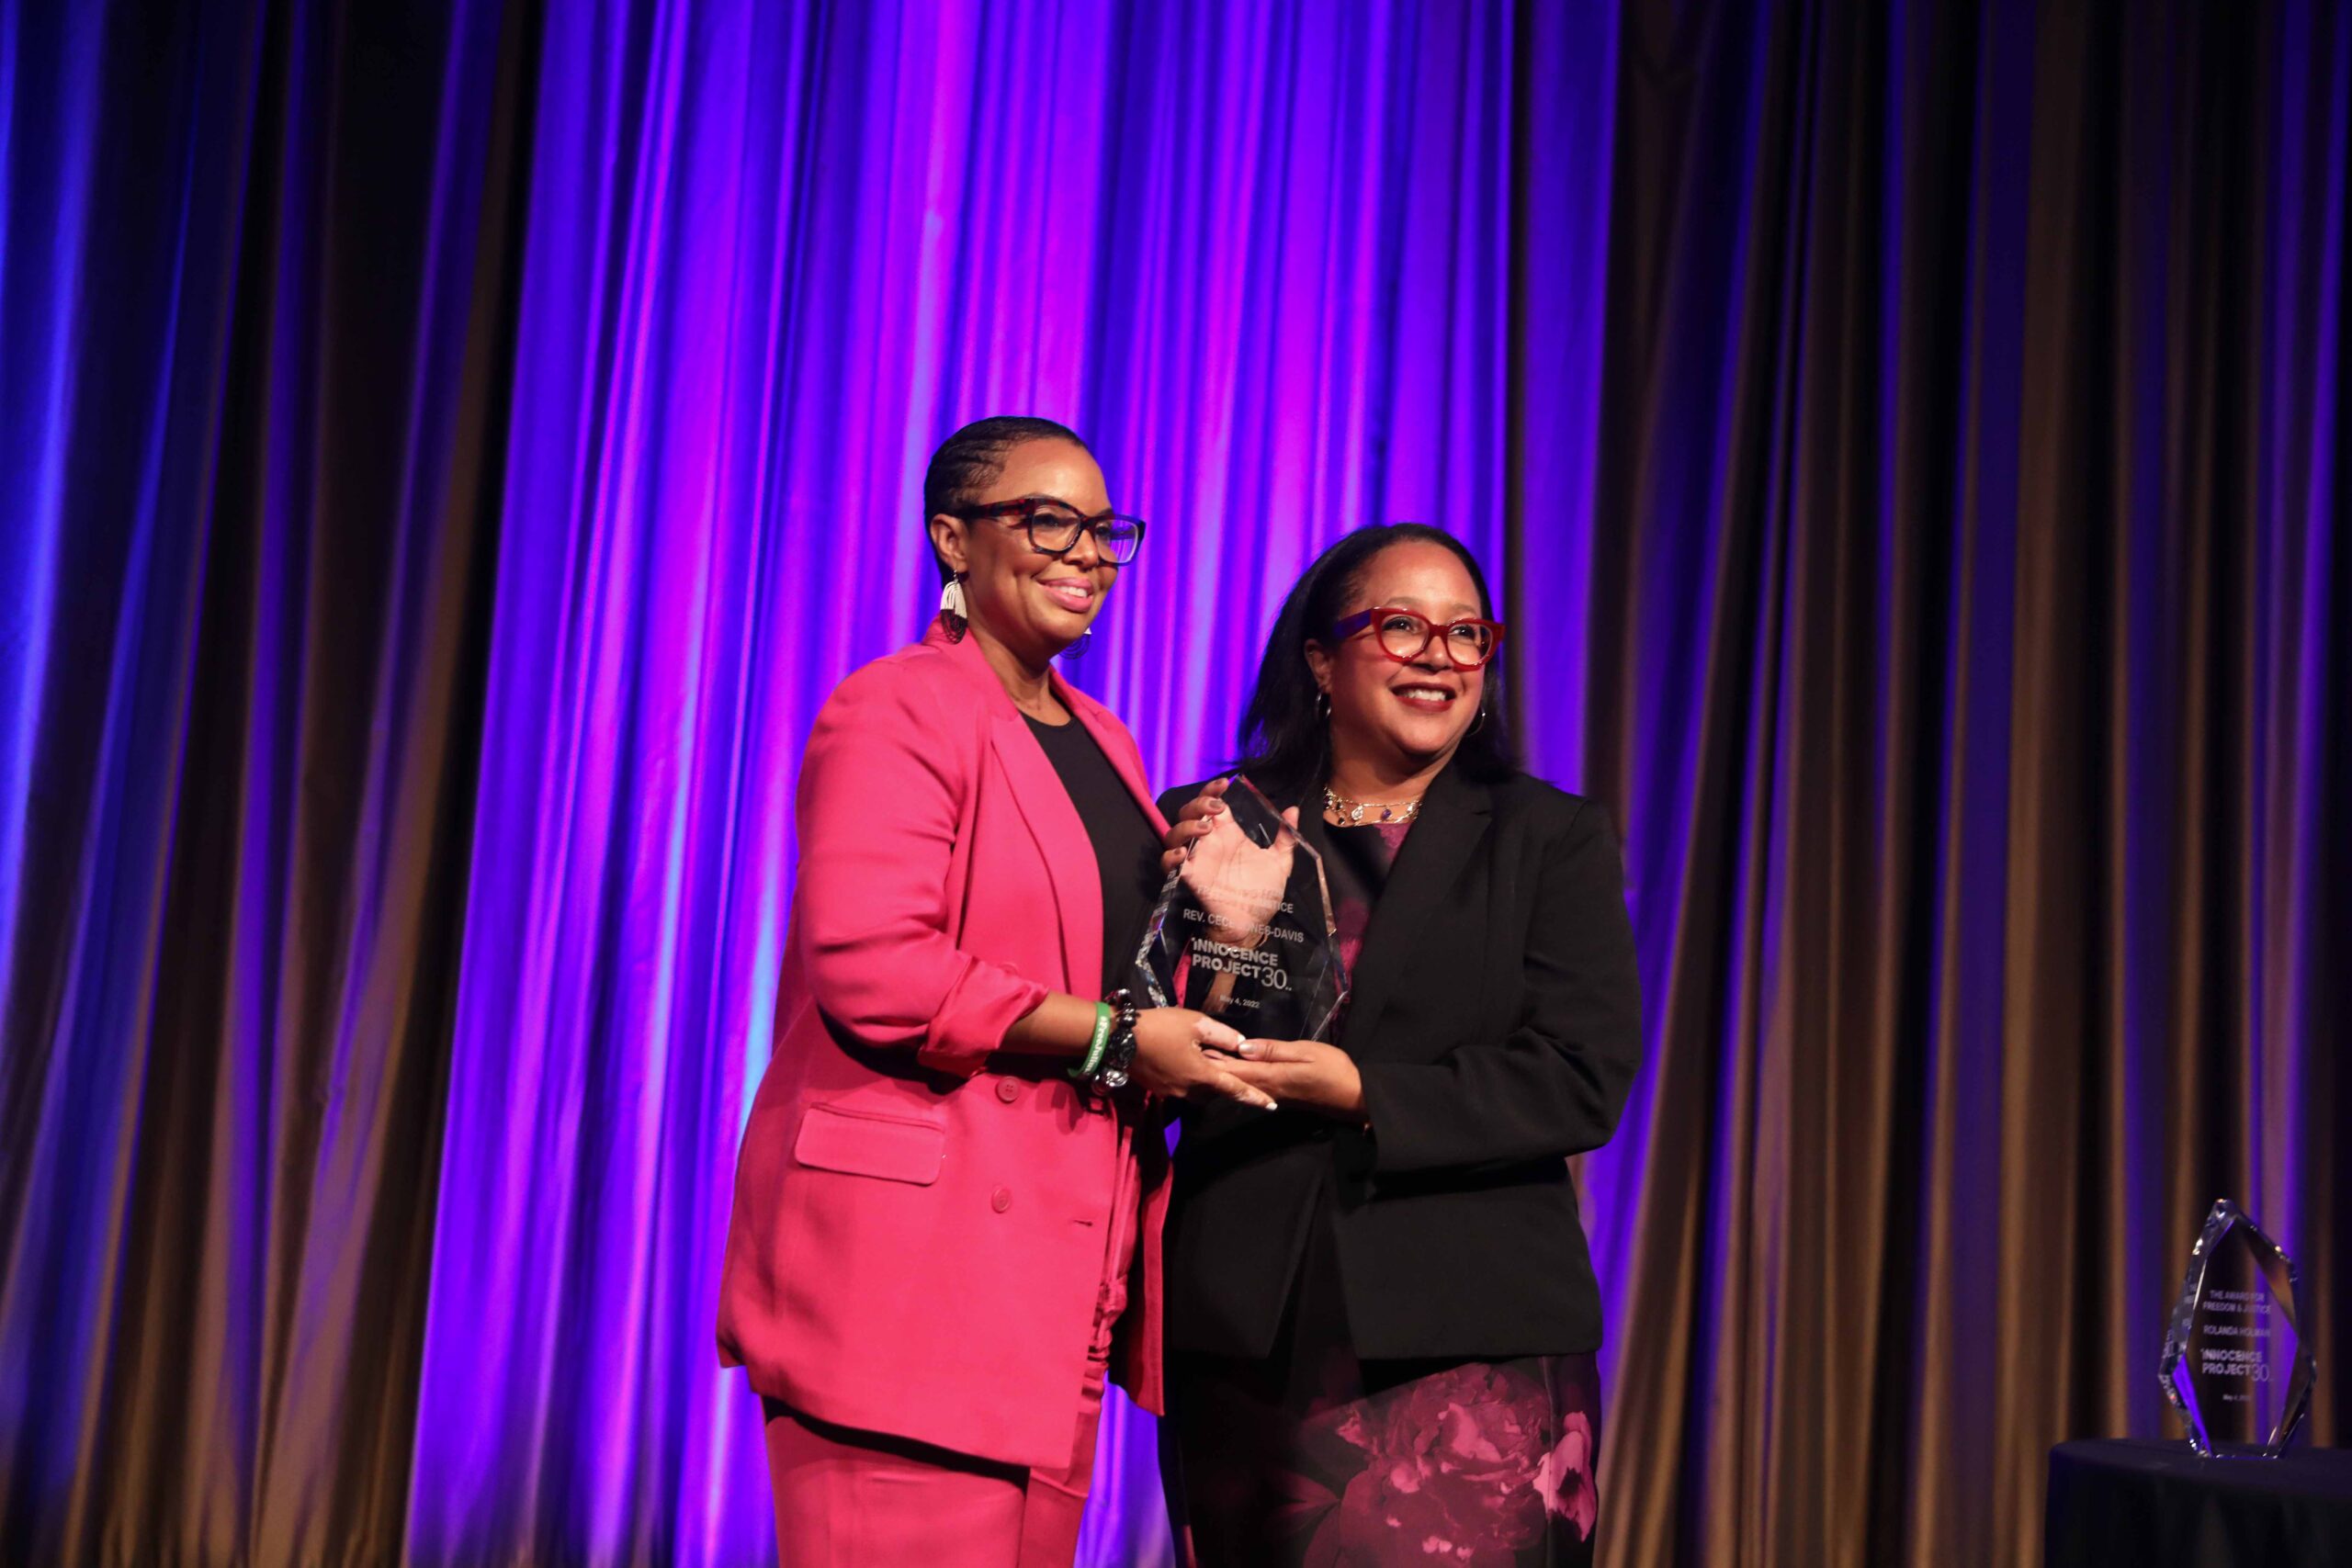 Cece Jones-Davis (left) with Innocence Project Executive Director Christina Swarns (right). Ms. Jones-Davis was awarded the Award for Freedom and Justice at the Innocence Project's 30th anniversary gala for her work campaigning to save Julius Jones. (Image: Matthew Adams Photography/Innocence Project)